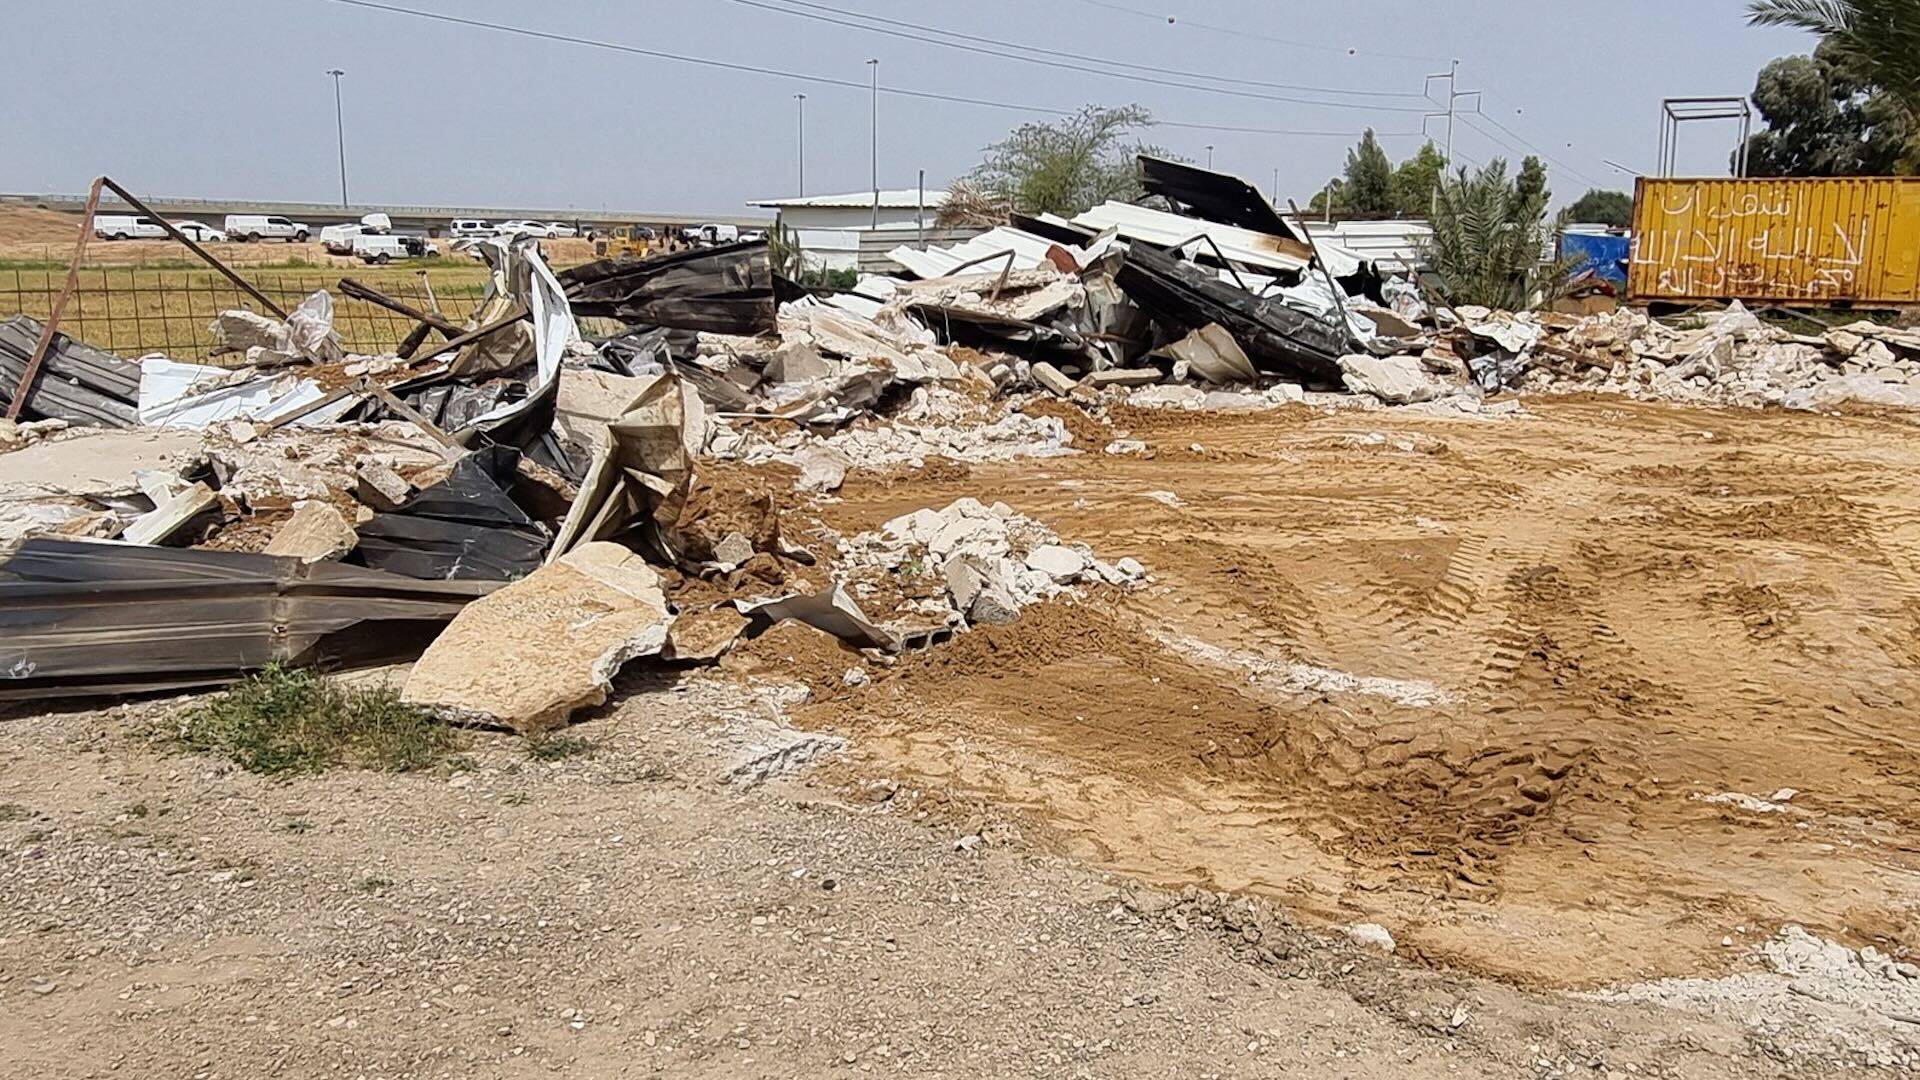 Video depicts demolition of Bedouin homes in Judean Foothills by Israeli forces